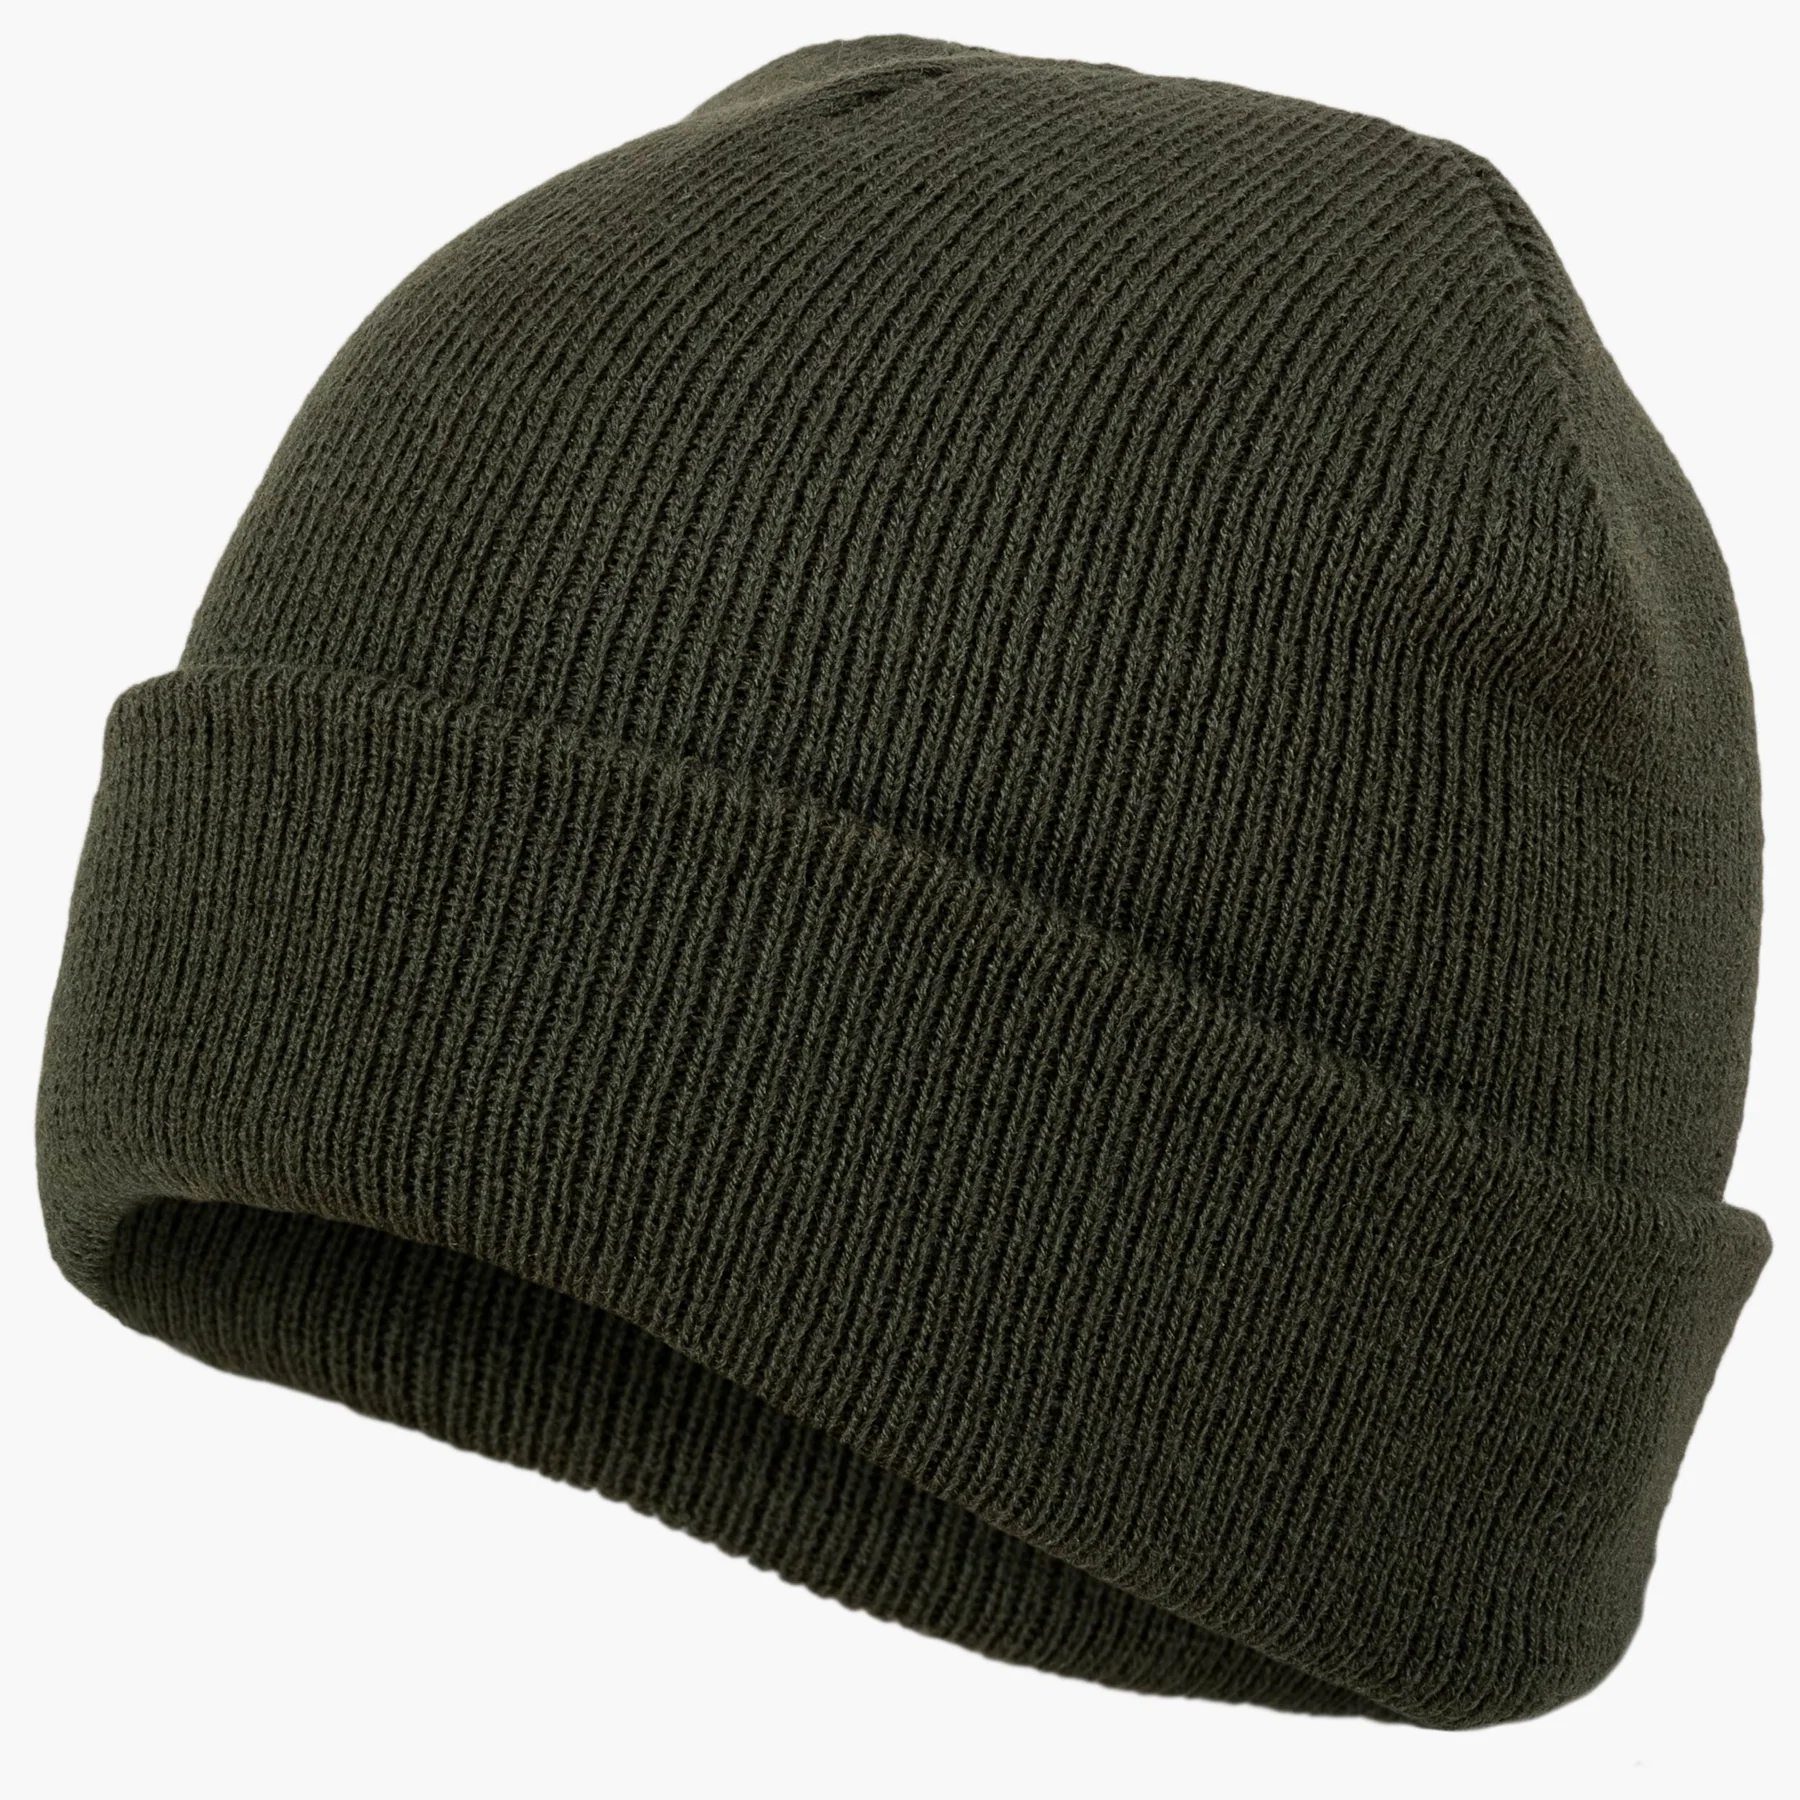 Hats/Gloves/Accessories : Highland Army Surplus Store